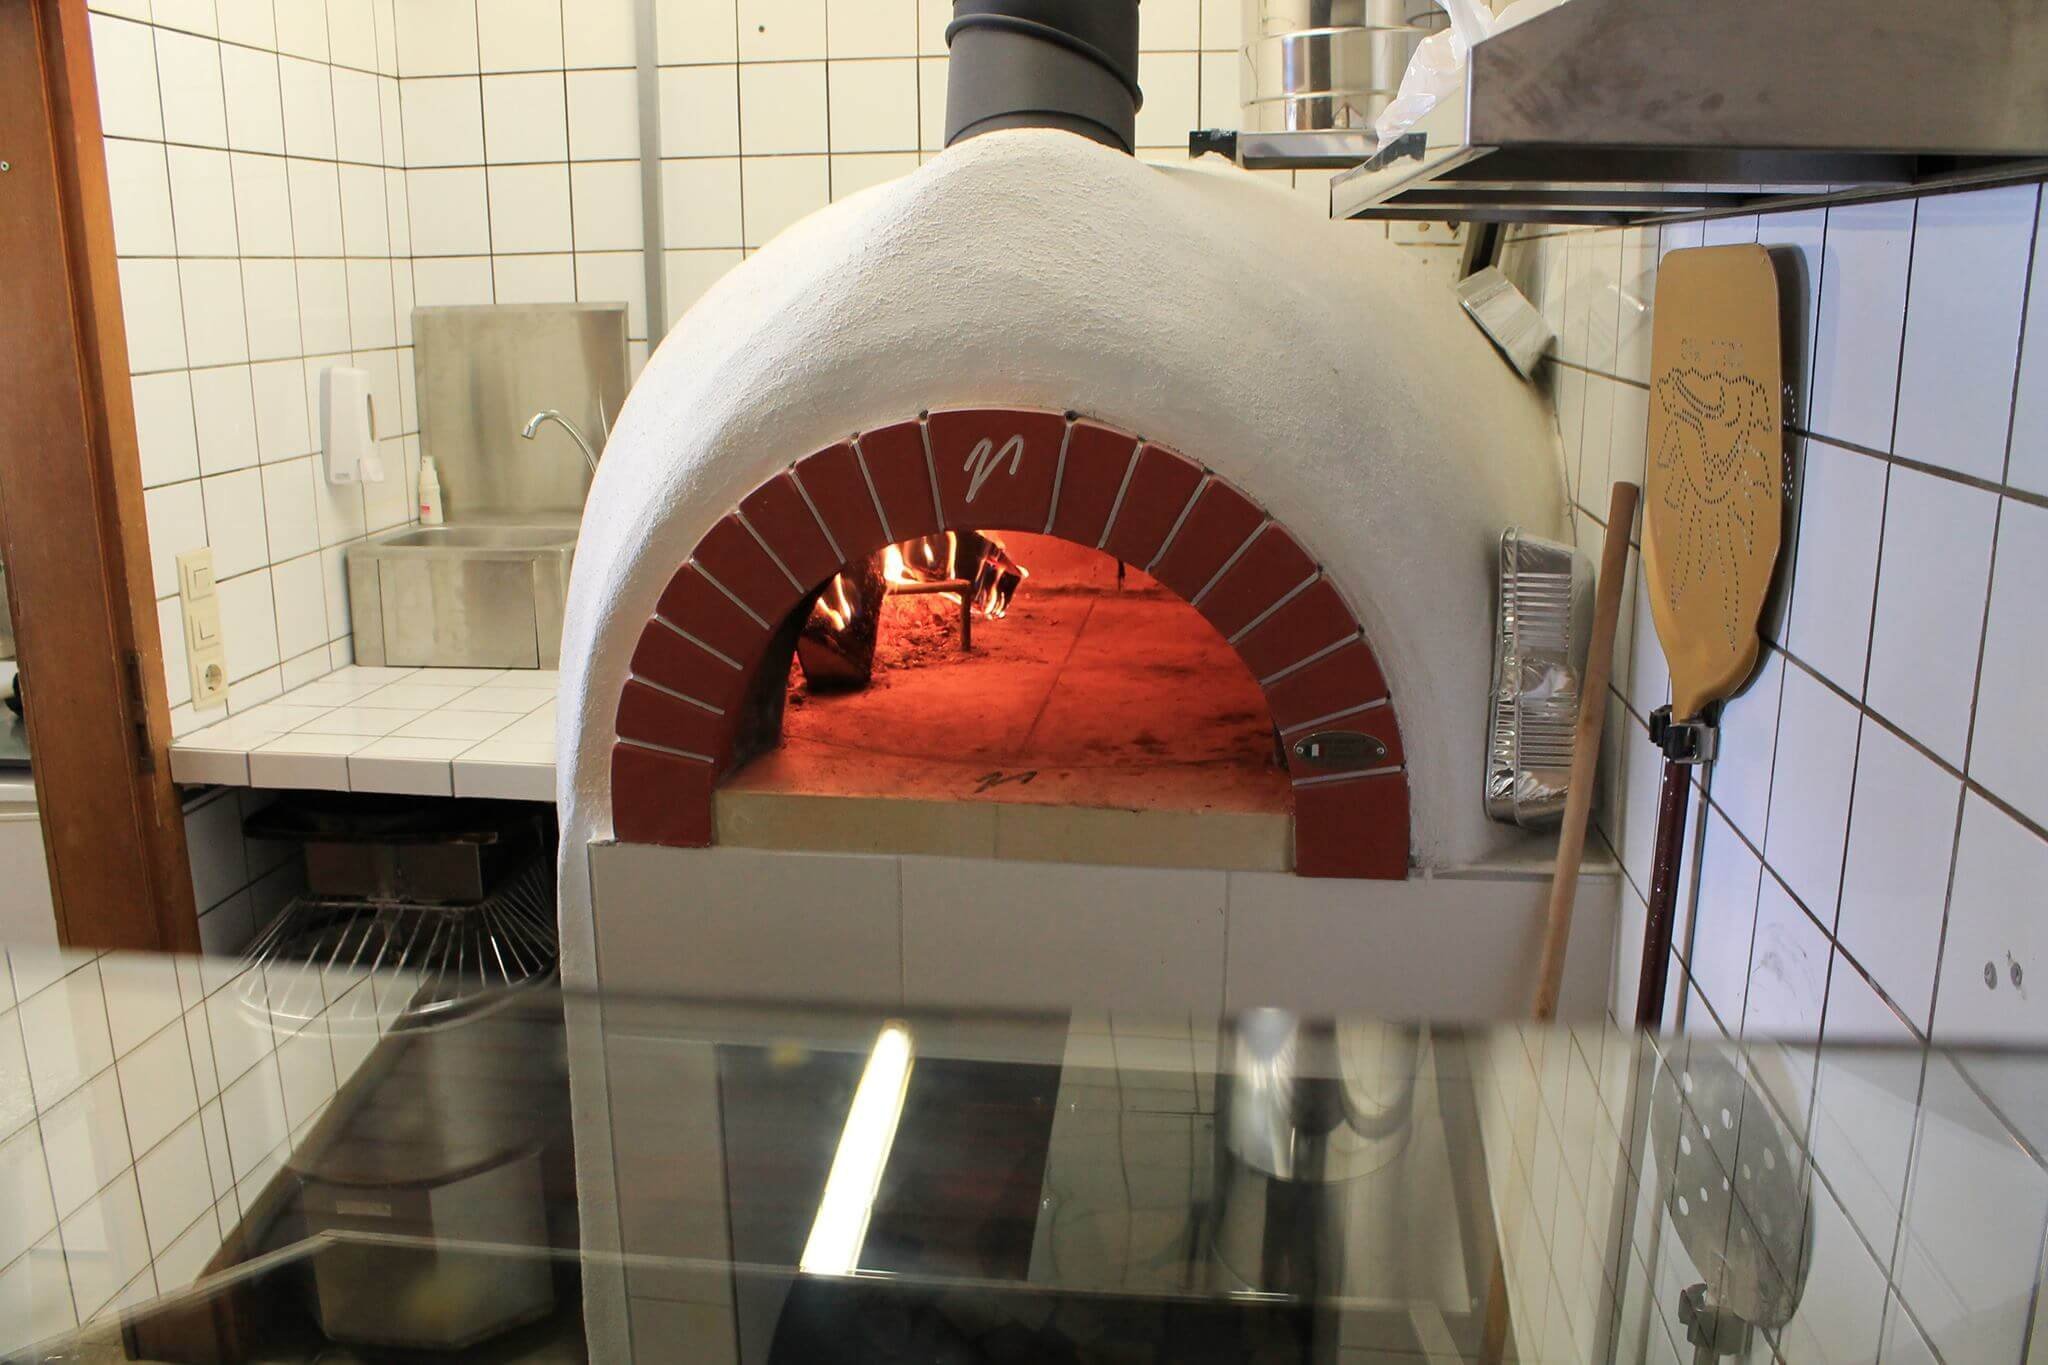 Professional pizza and baking oven, wood firing for continuous firing, Valoriani Vesuvio GR, 160cm